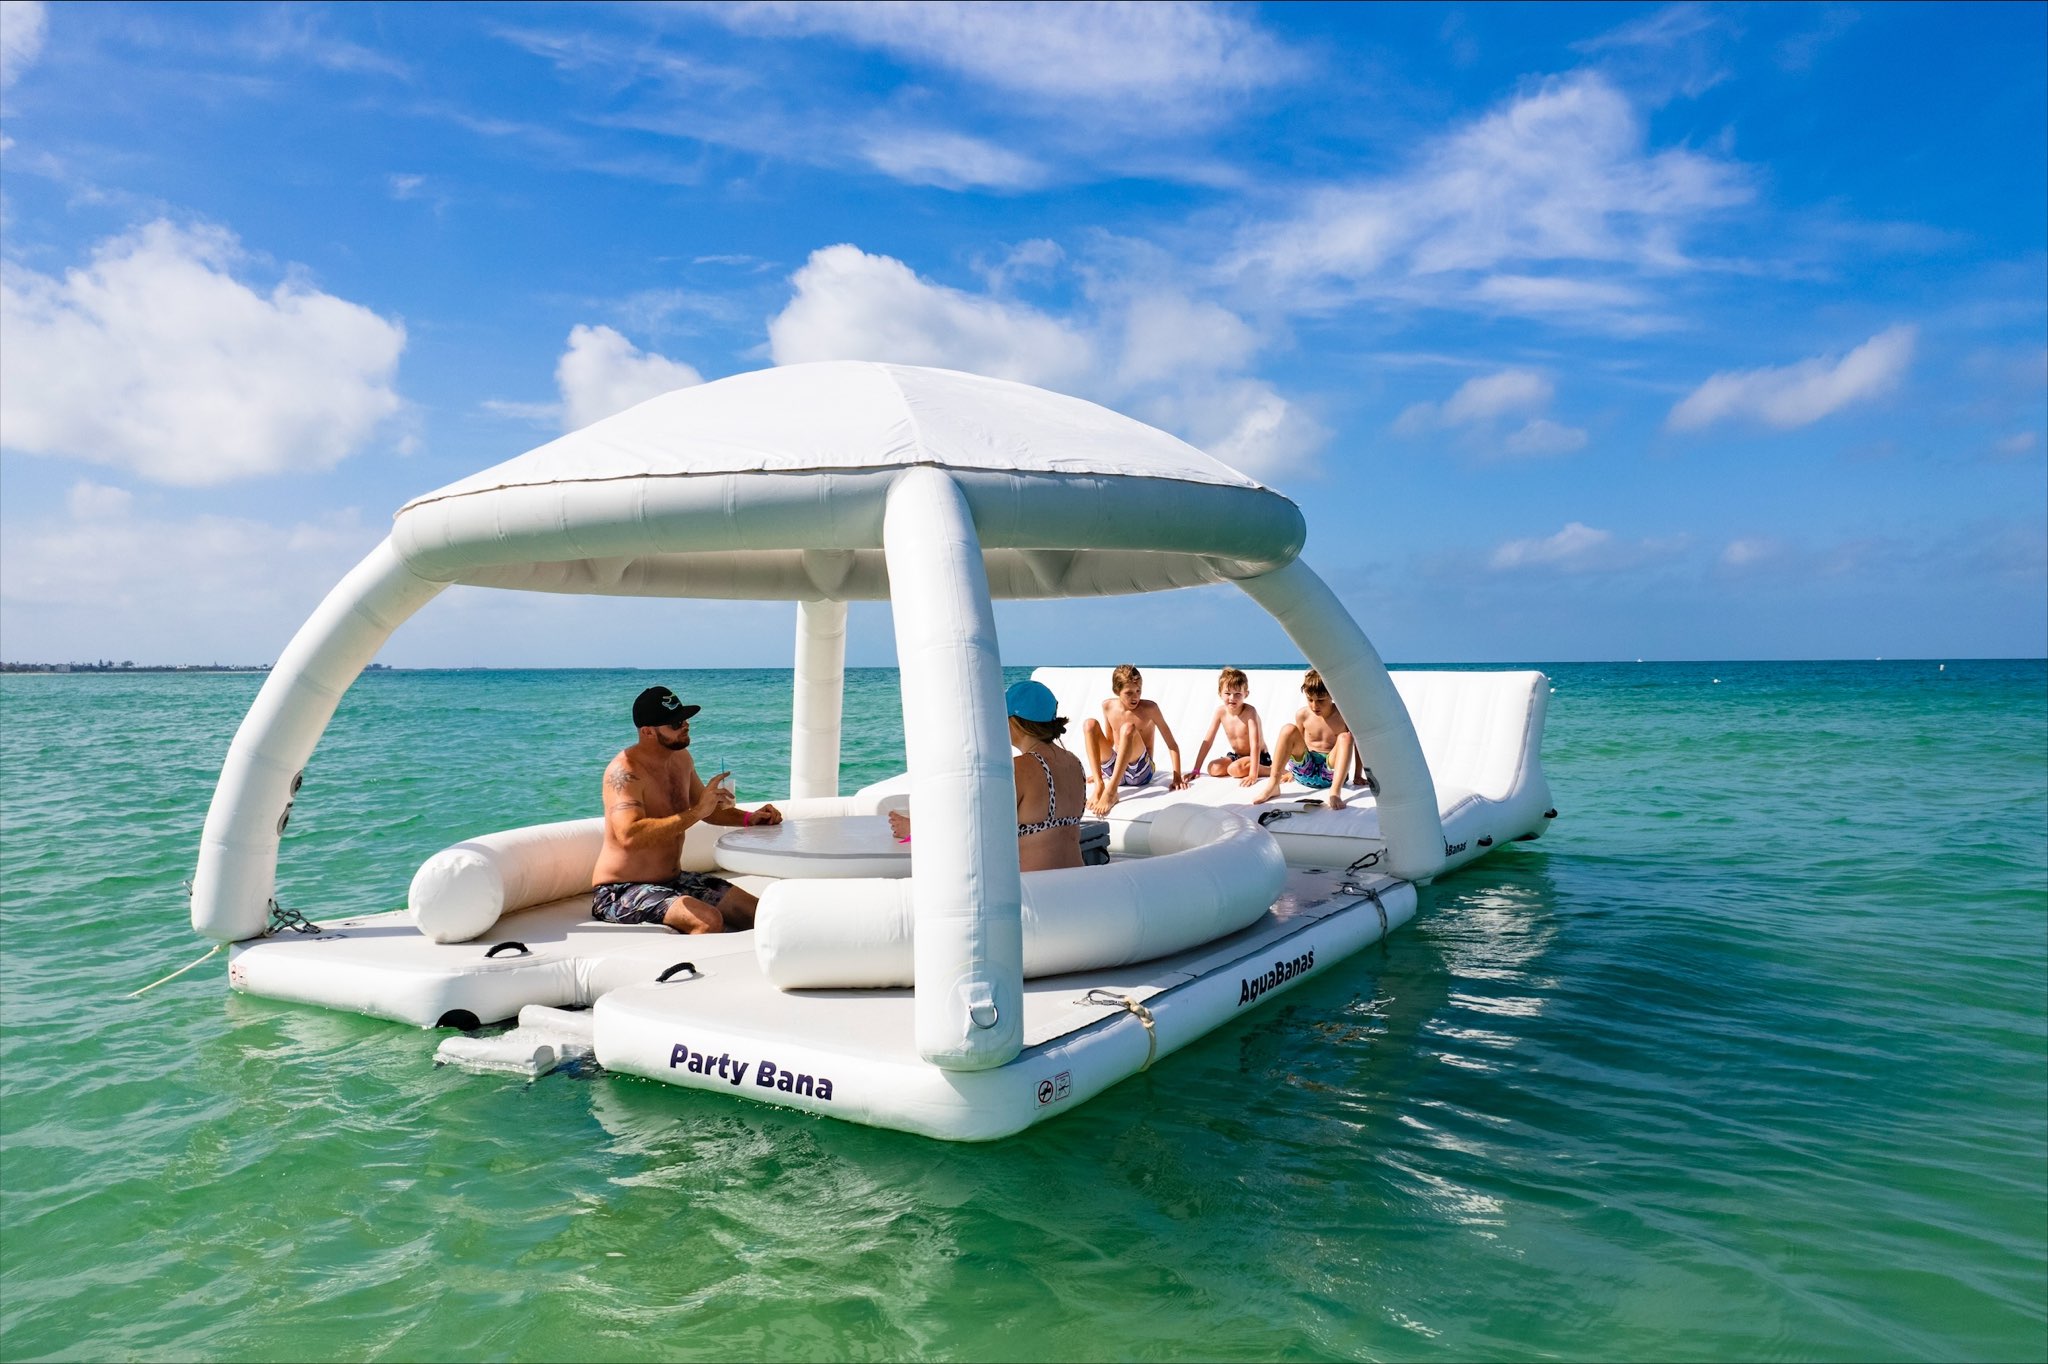 Resort Banas - Party Bana at Tradewinds, inflatable superyacht toys